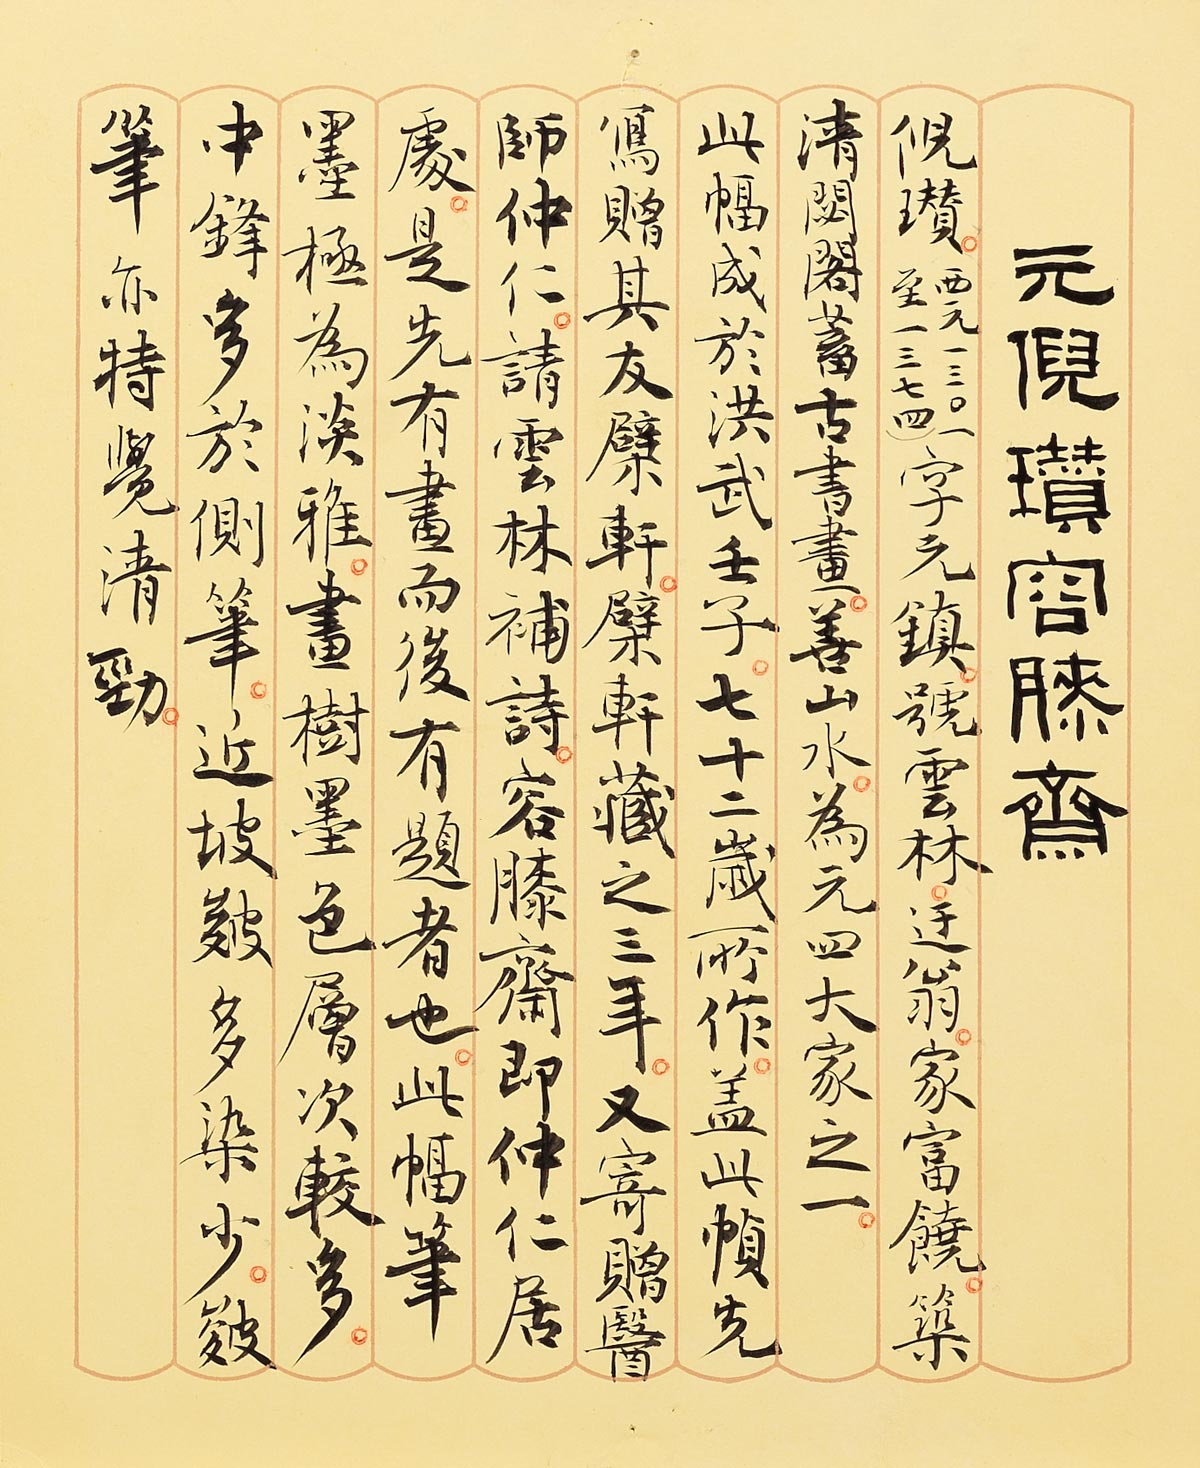 In the mid-1960s, Fu Shen wrote explanatory cards in brush and ink.